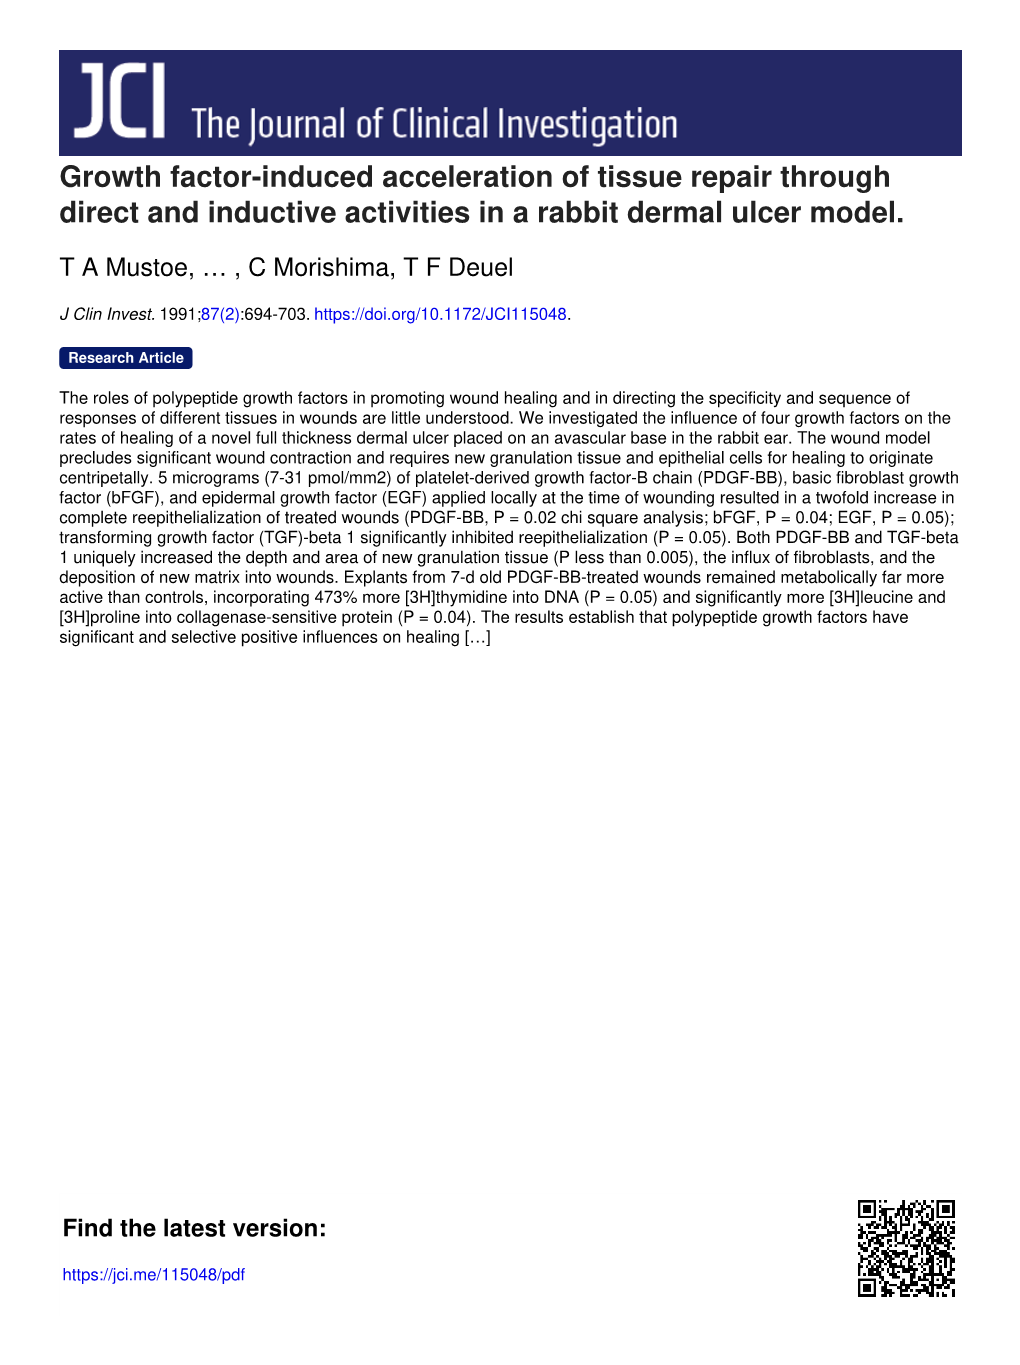 Growth Factor-Induced Acceleration of Tissue Repair Through Direct and Inductive Activities in a Rabbit Dermal Ulcer Model